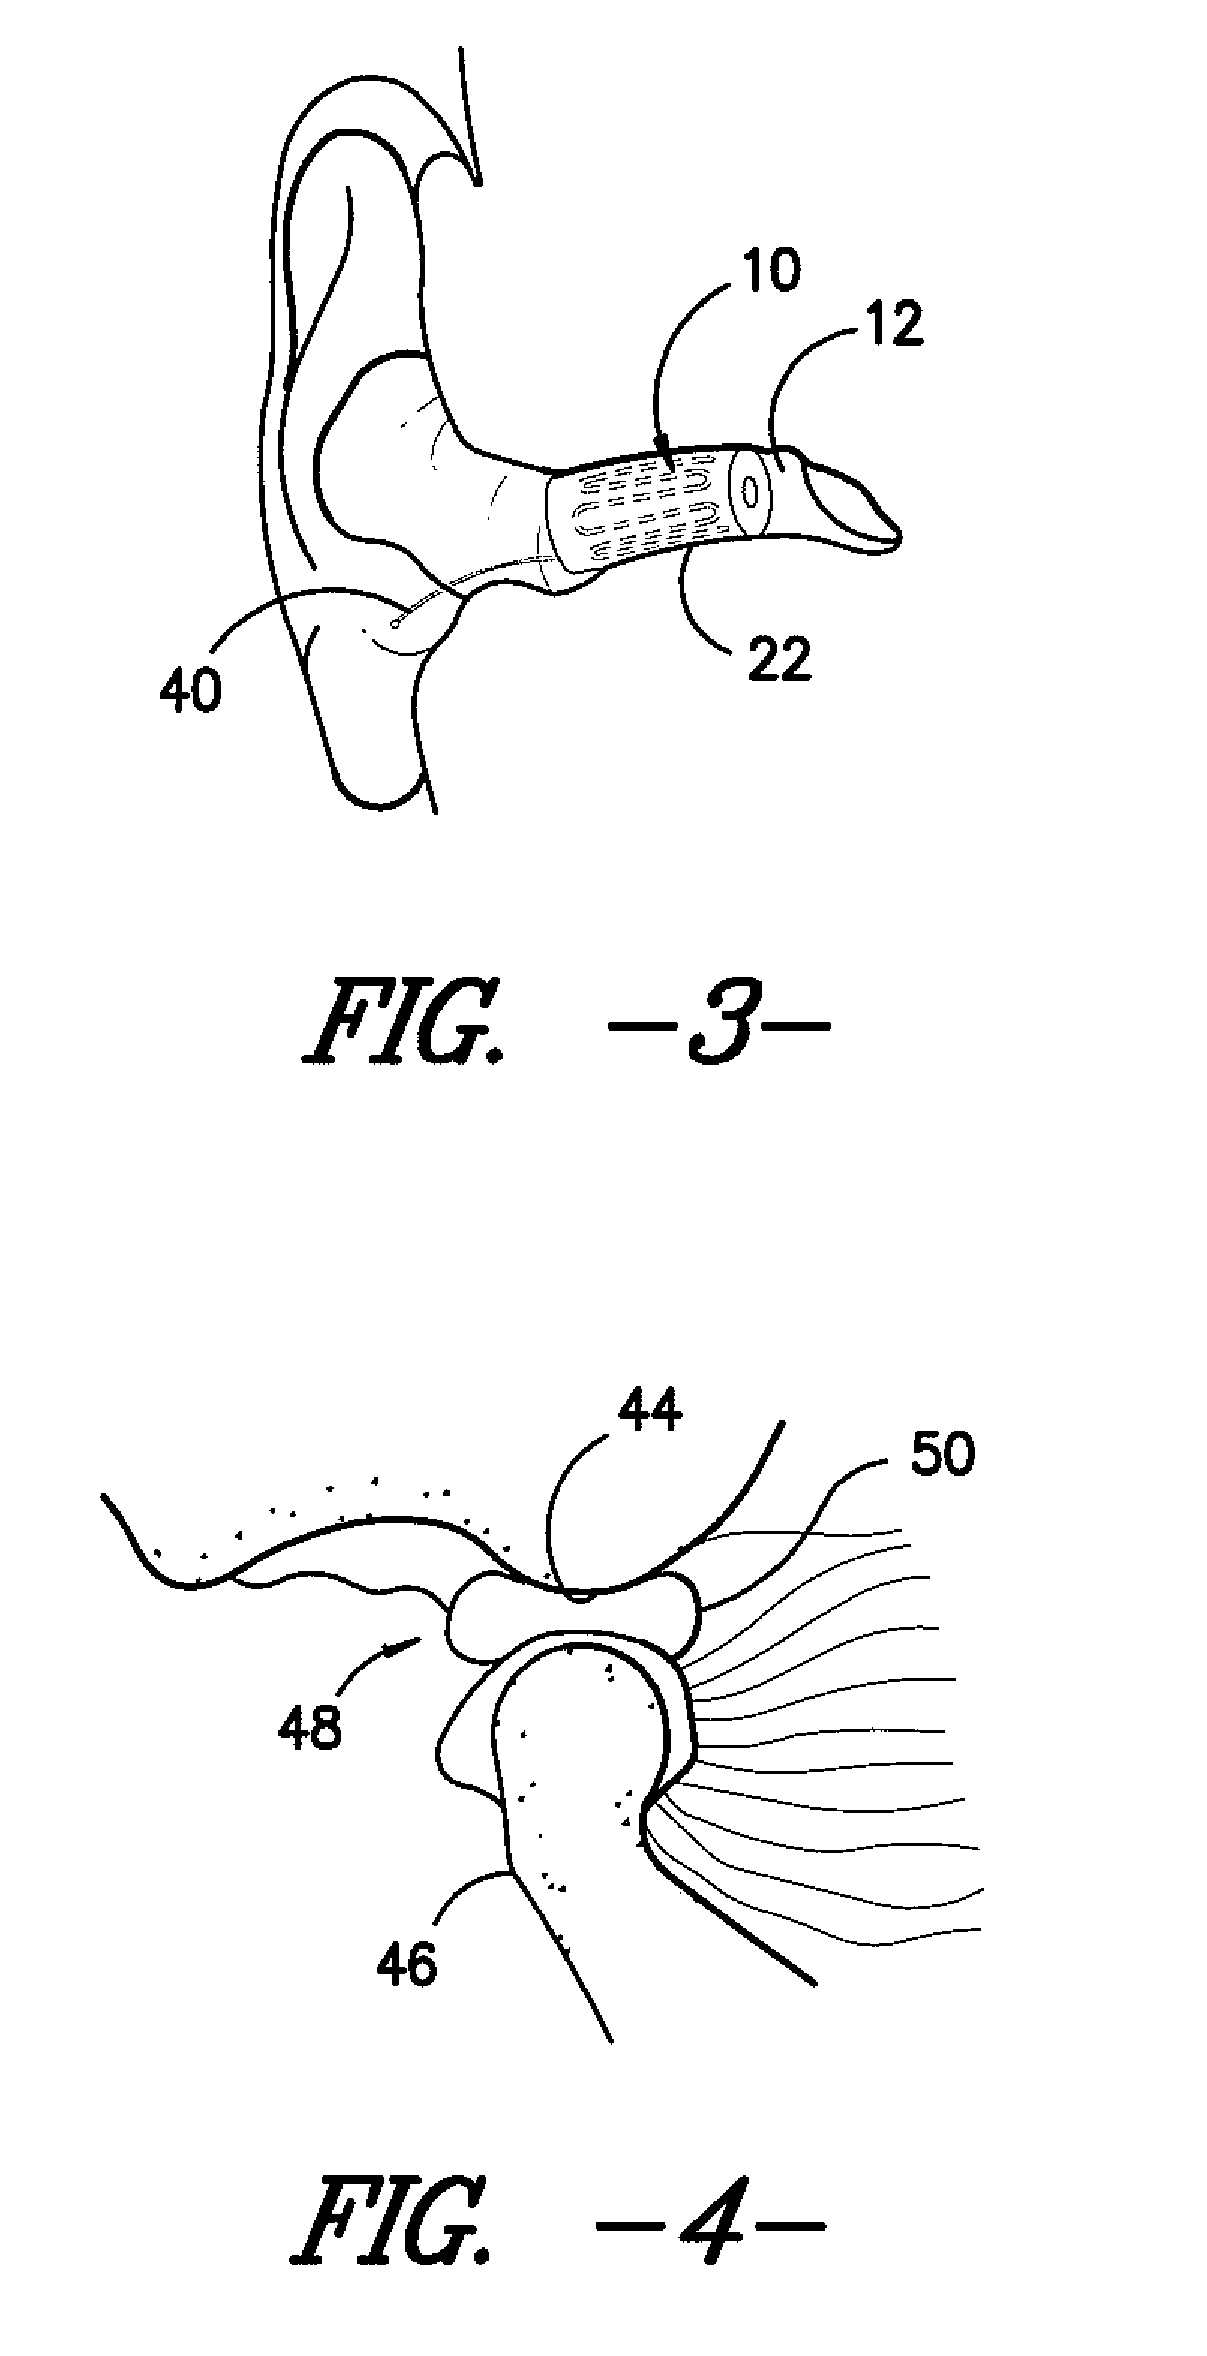 Ear insert for relief of TMJ discomfort and headaches